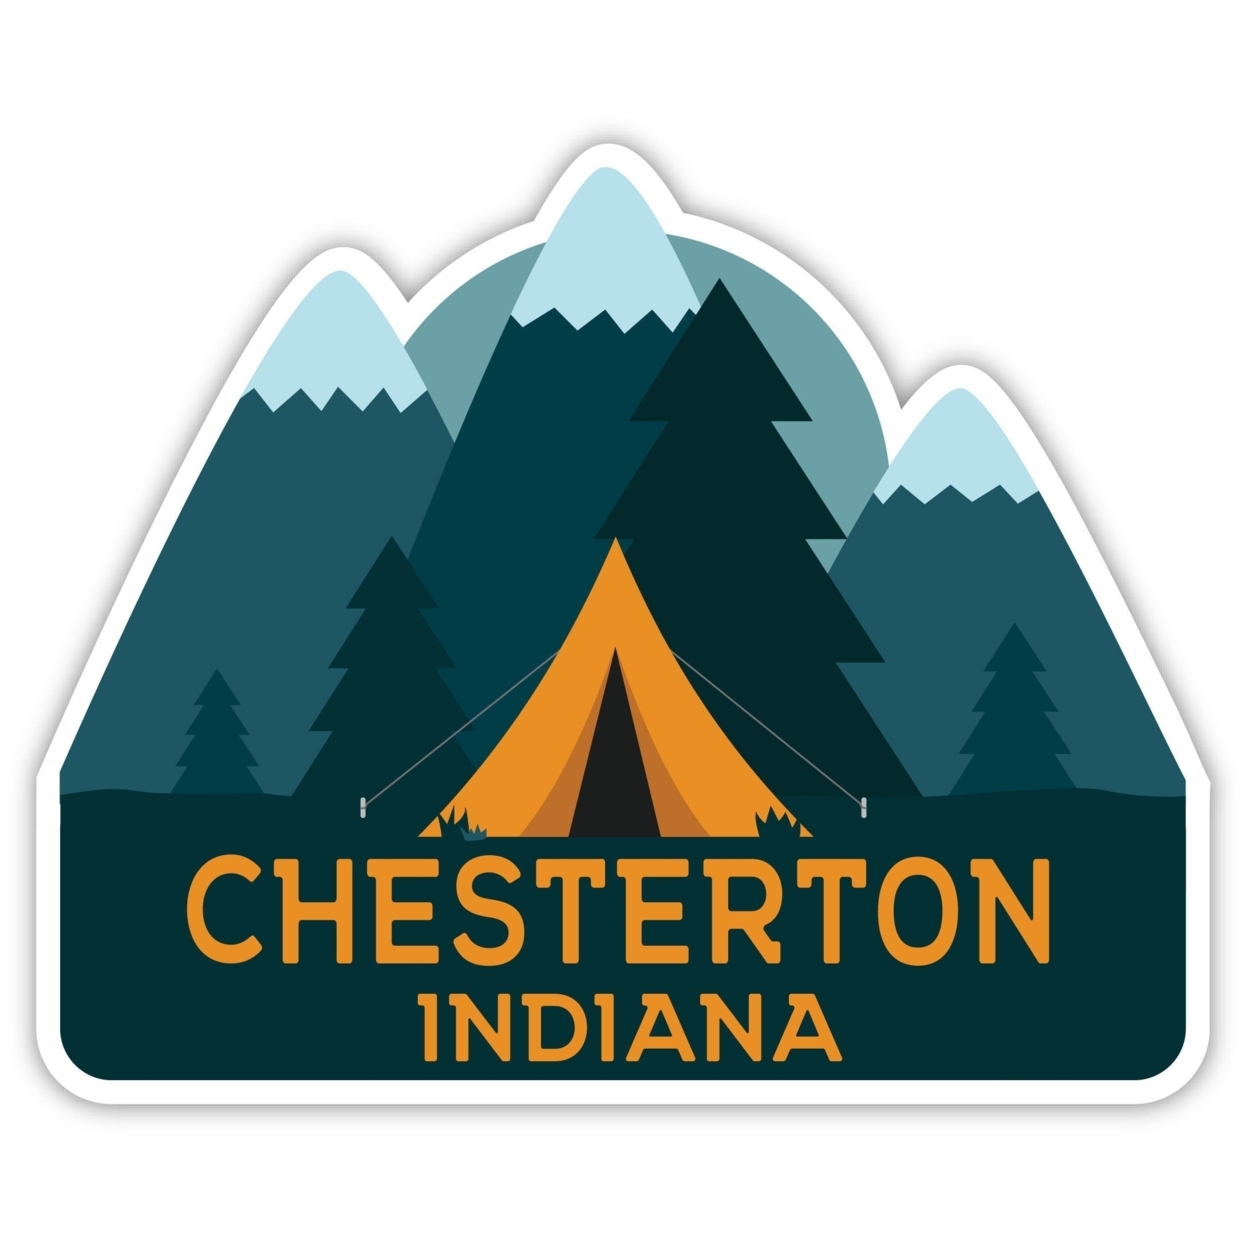 Chesterton Indiana Souvenir Decorative Stickers (Choose Theme And Size) - 4-Pack, 6-Inch, Tent